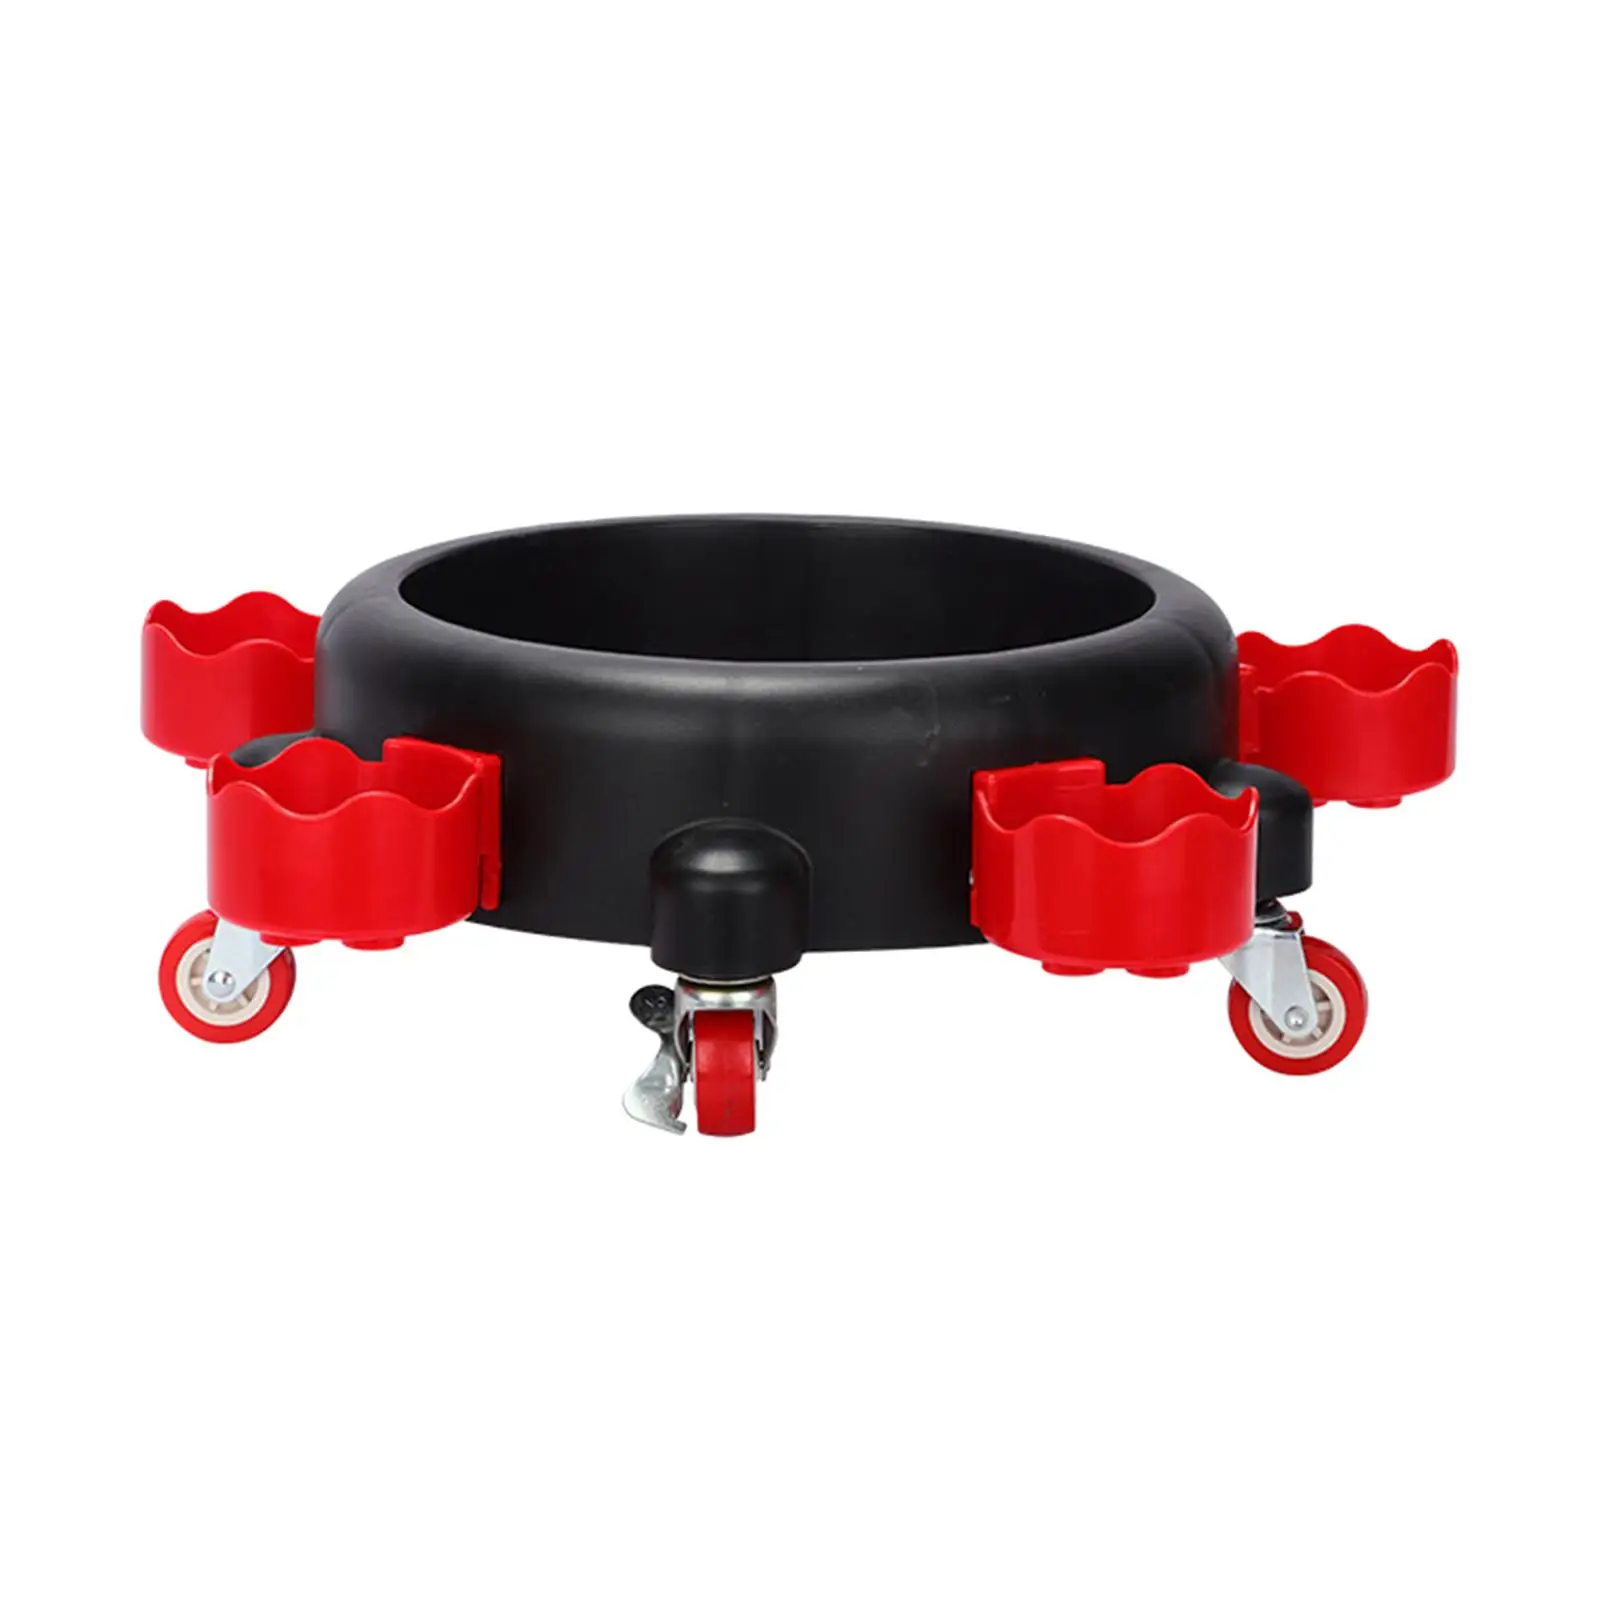 Bucket Dolly for Car Washing Detailing Painting Assistance Car Beauty